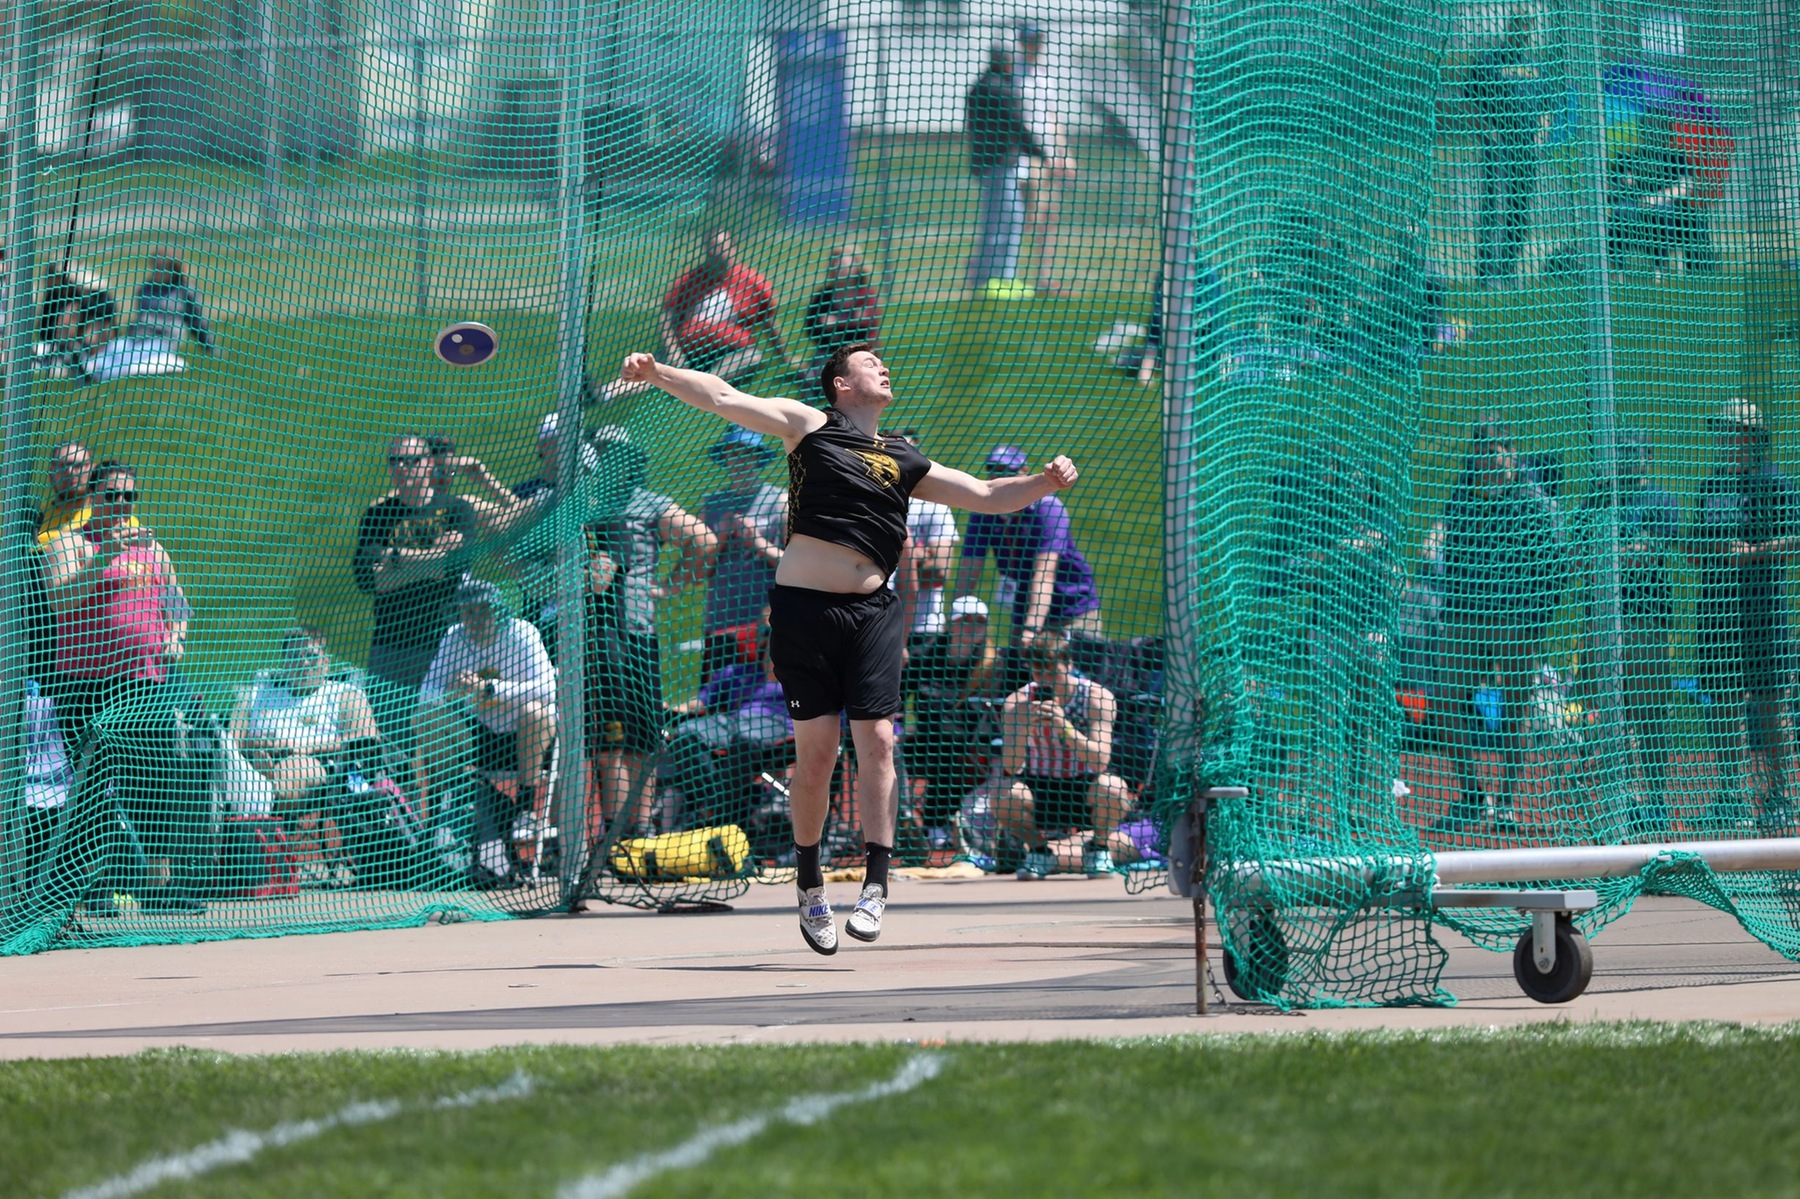 Jack Flynn won the discus at the Augustana College Twilight Invitational with a mark of 174-2.